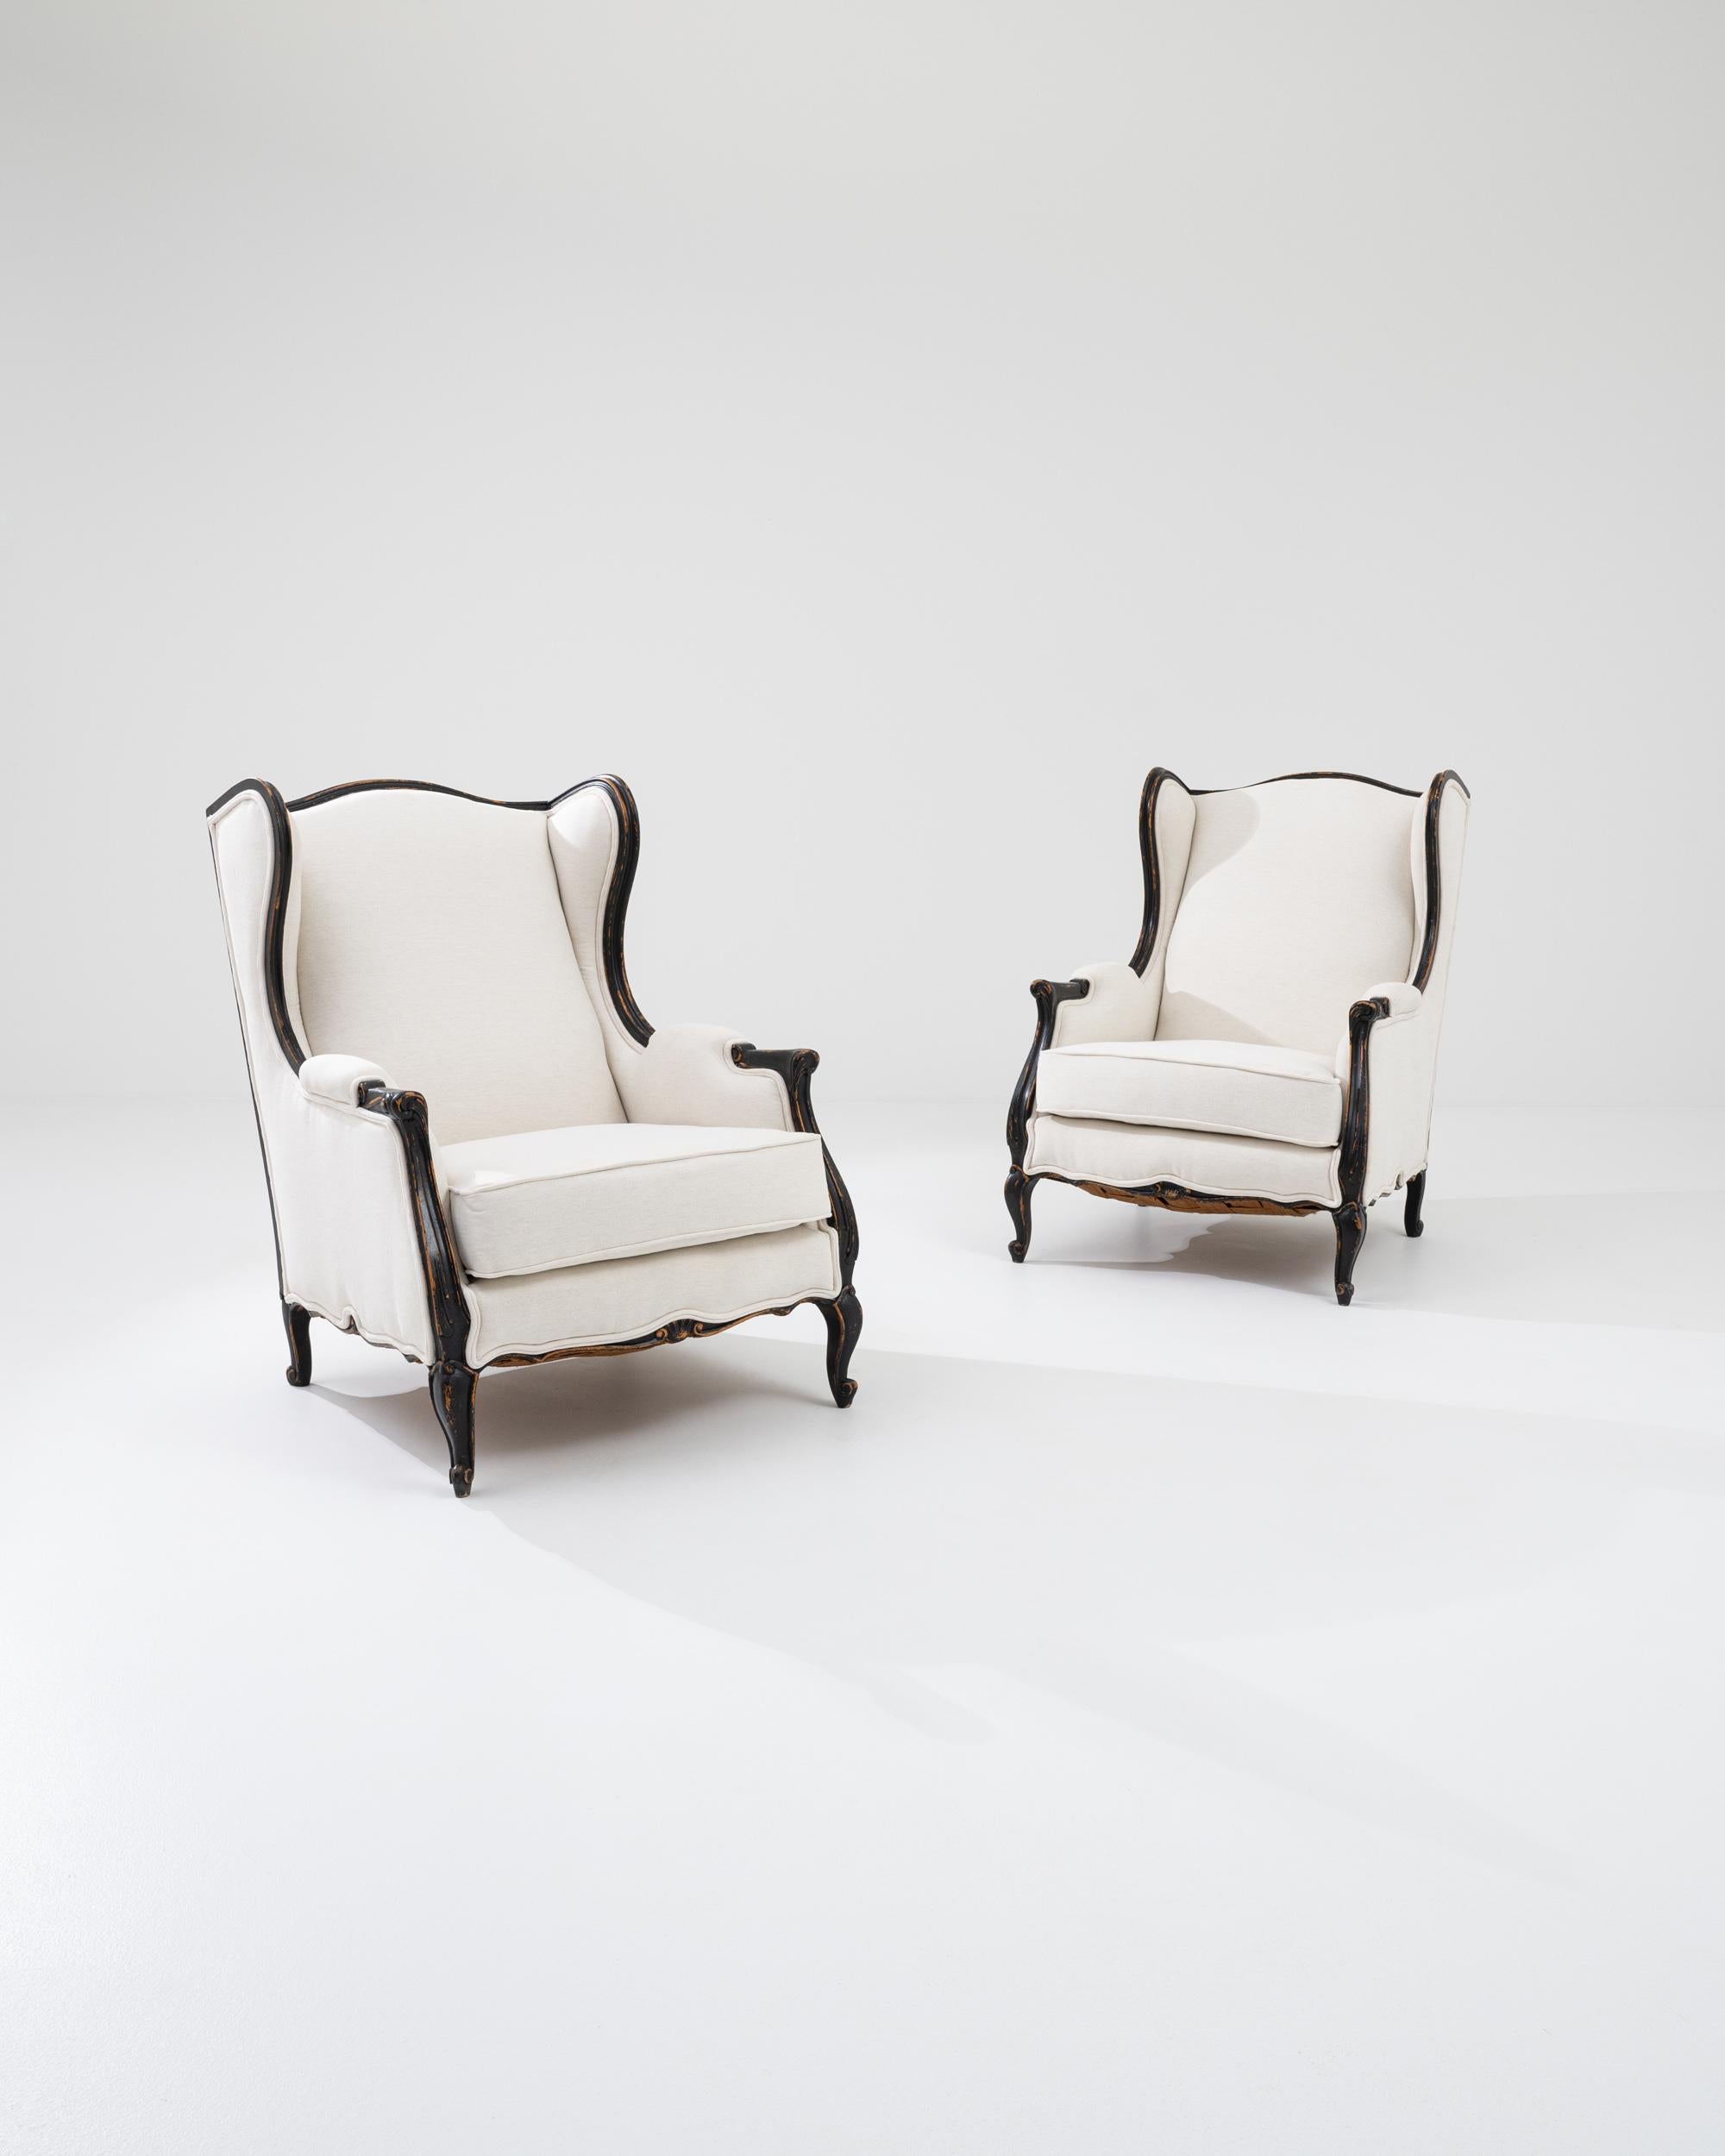 This grand pair of winged armchairs offer an irresistibly comfortable seat. Made in 20th century France, the shape takes inspiration from the traditional wingback chairs of centuries past, originally designed to create a cocoon of warmth from the